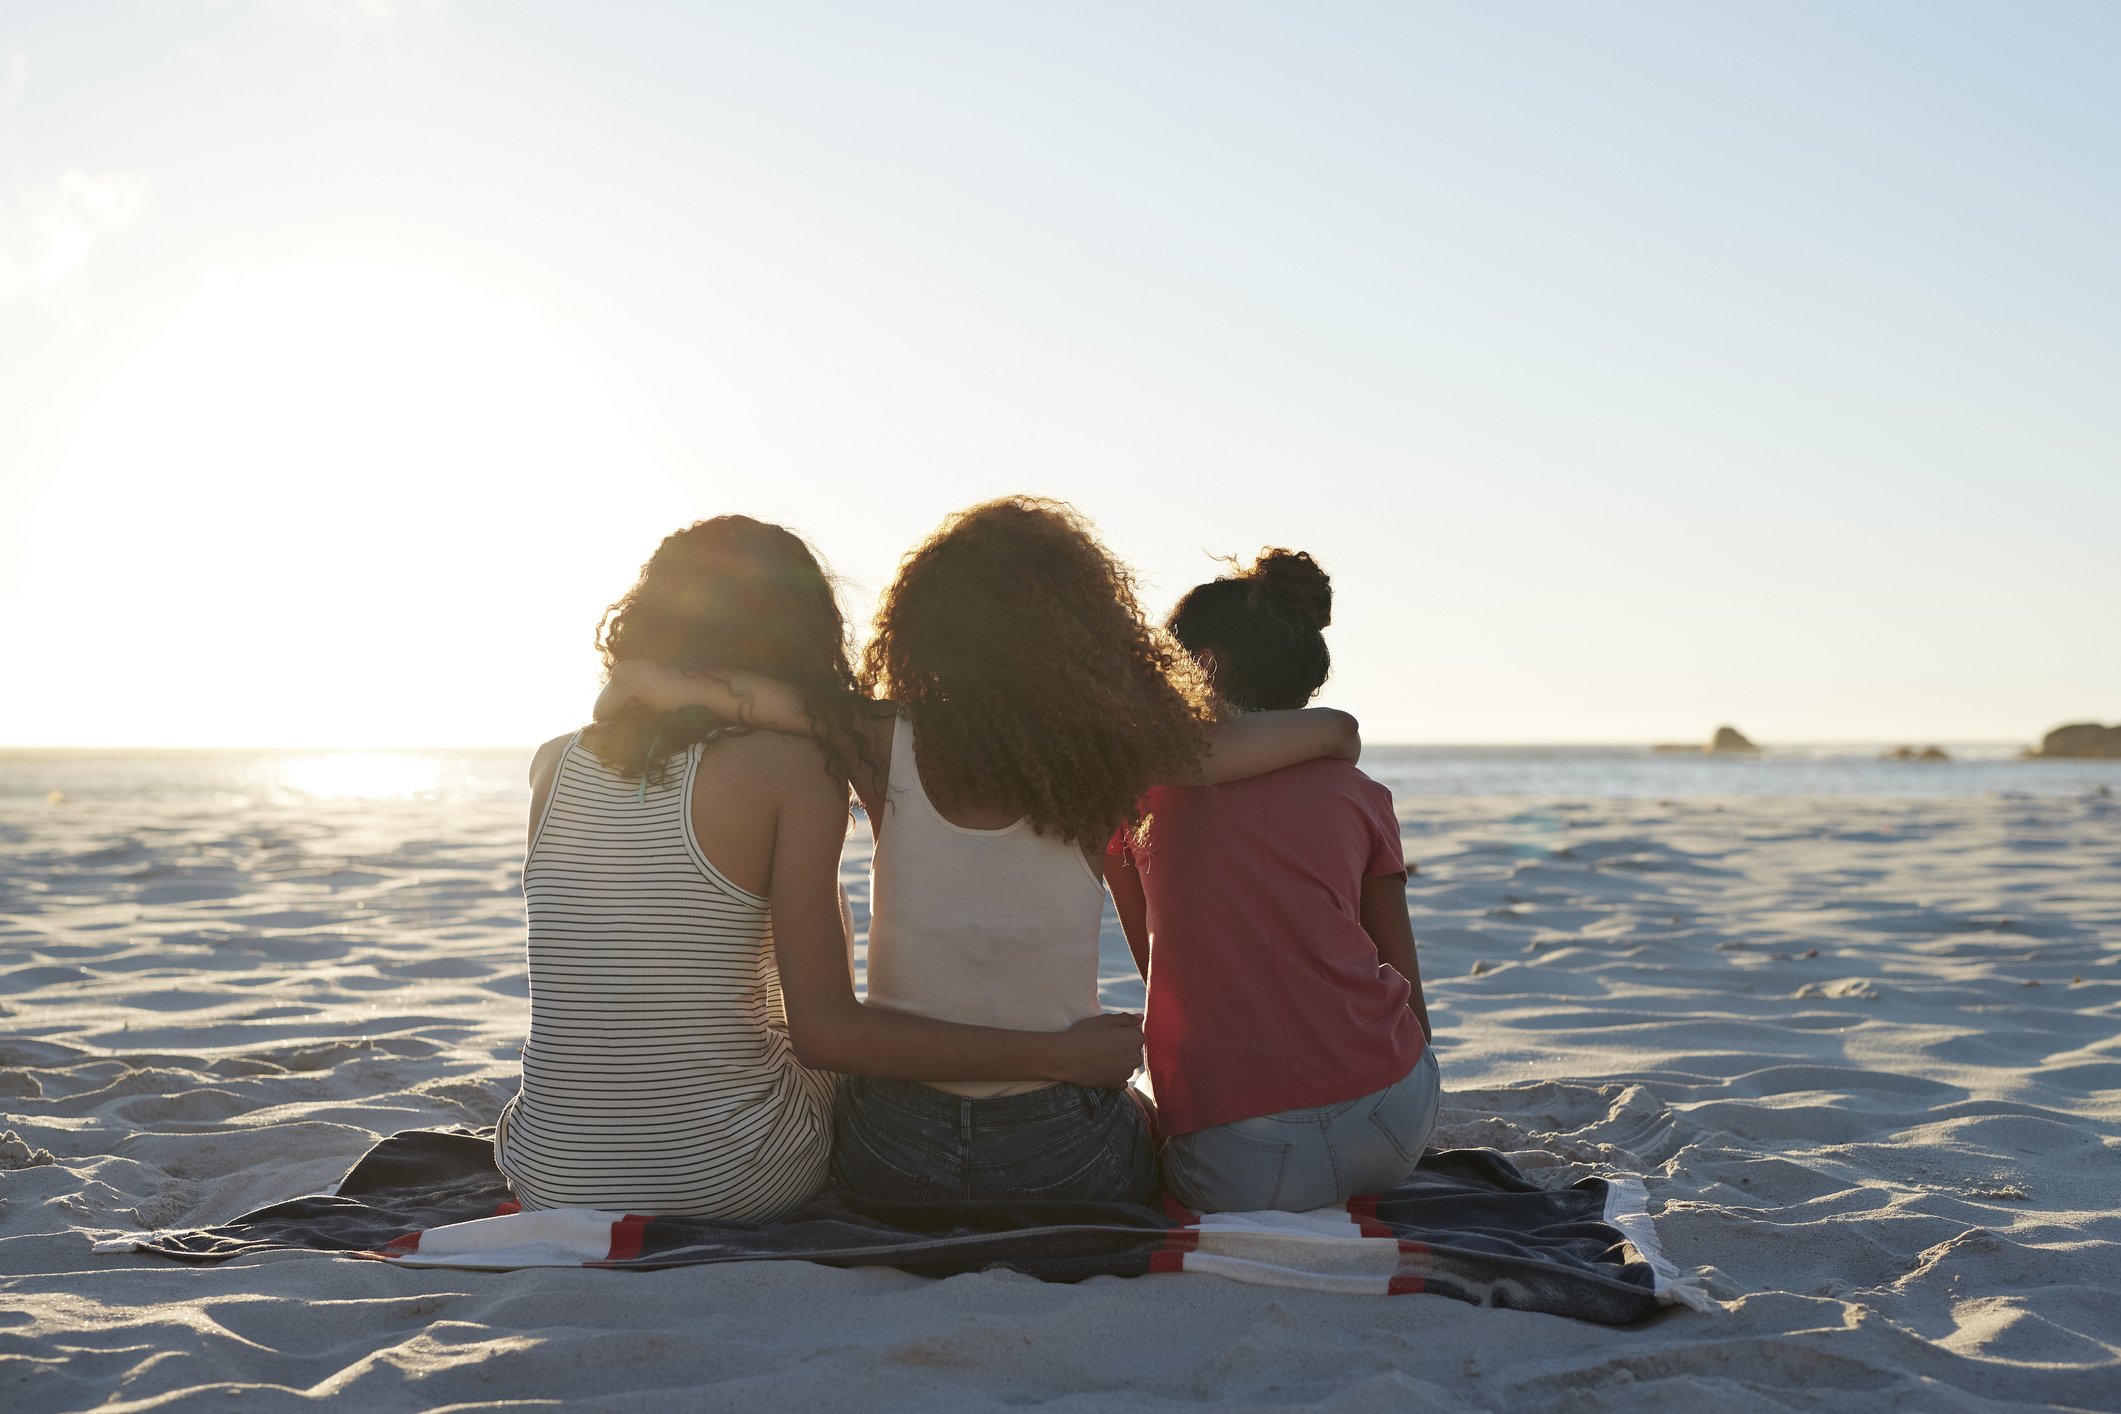 Rear view of three young women sitting on the beach. | Photo: Getty Images